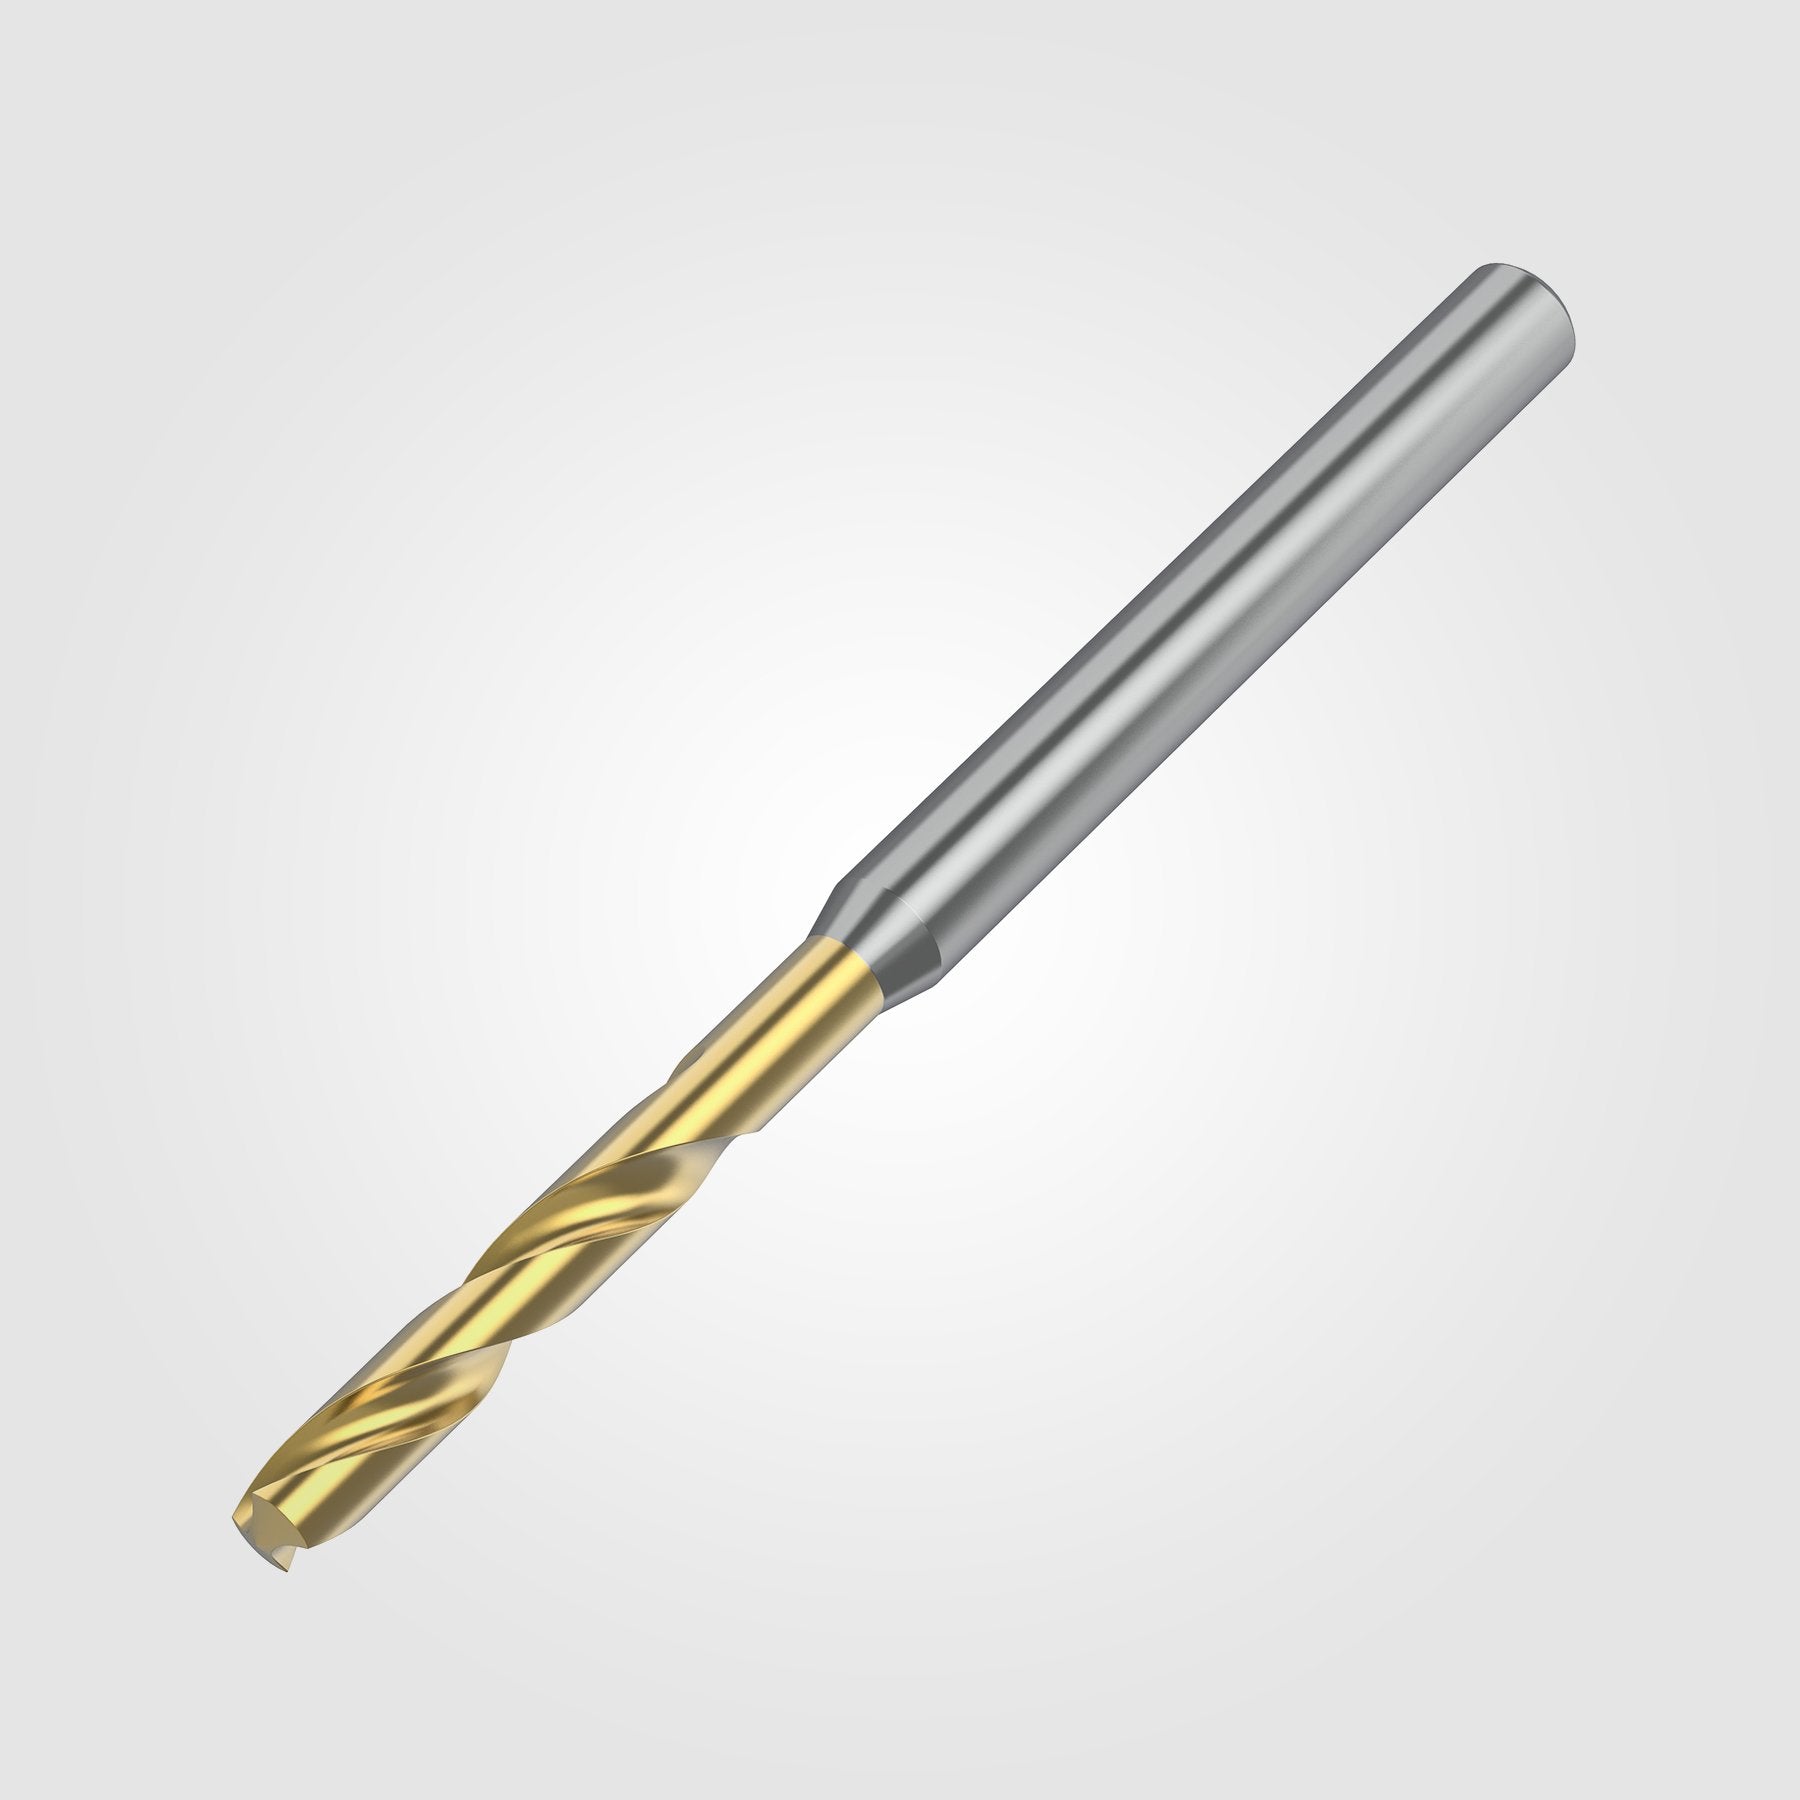 GOdrill (THROUGH COOLANT) | 2.8mm / .1102" / 3xD | SOLID CARBIDE DRILL | 4148854